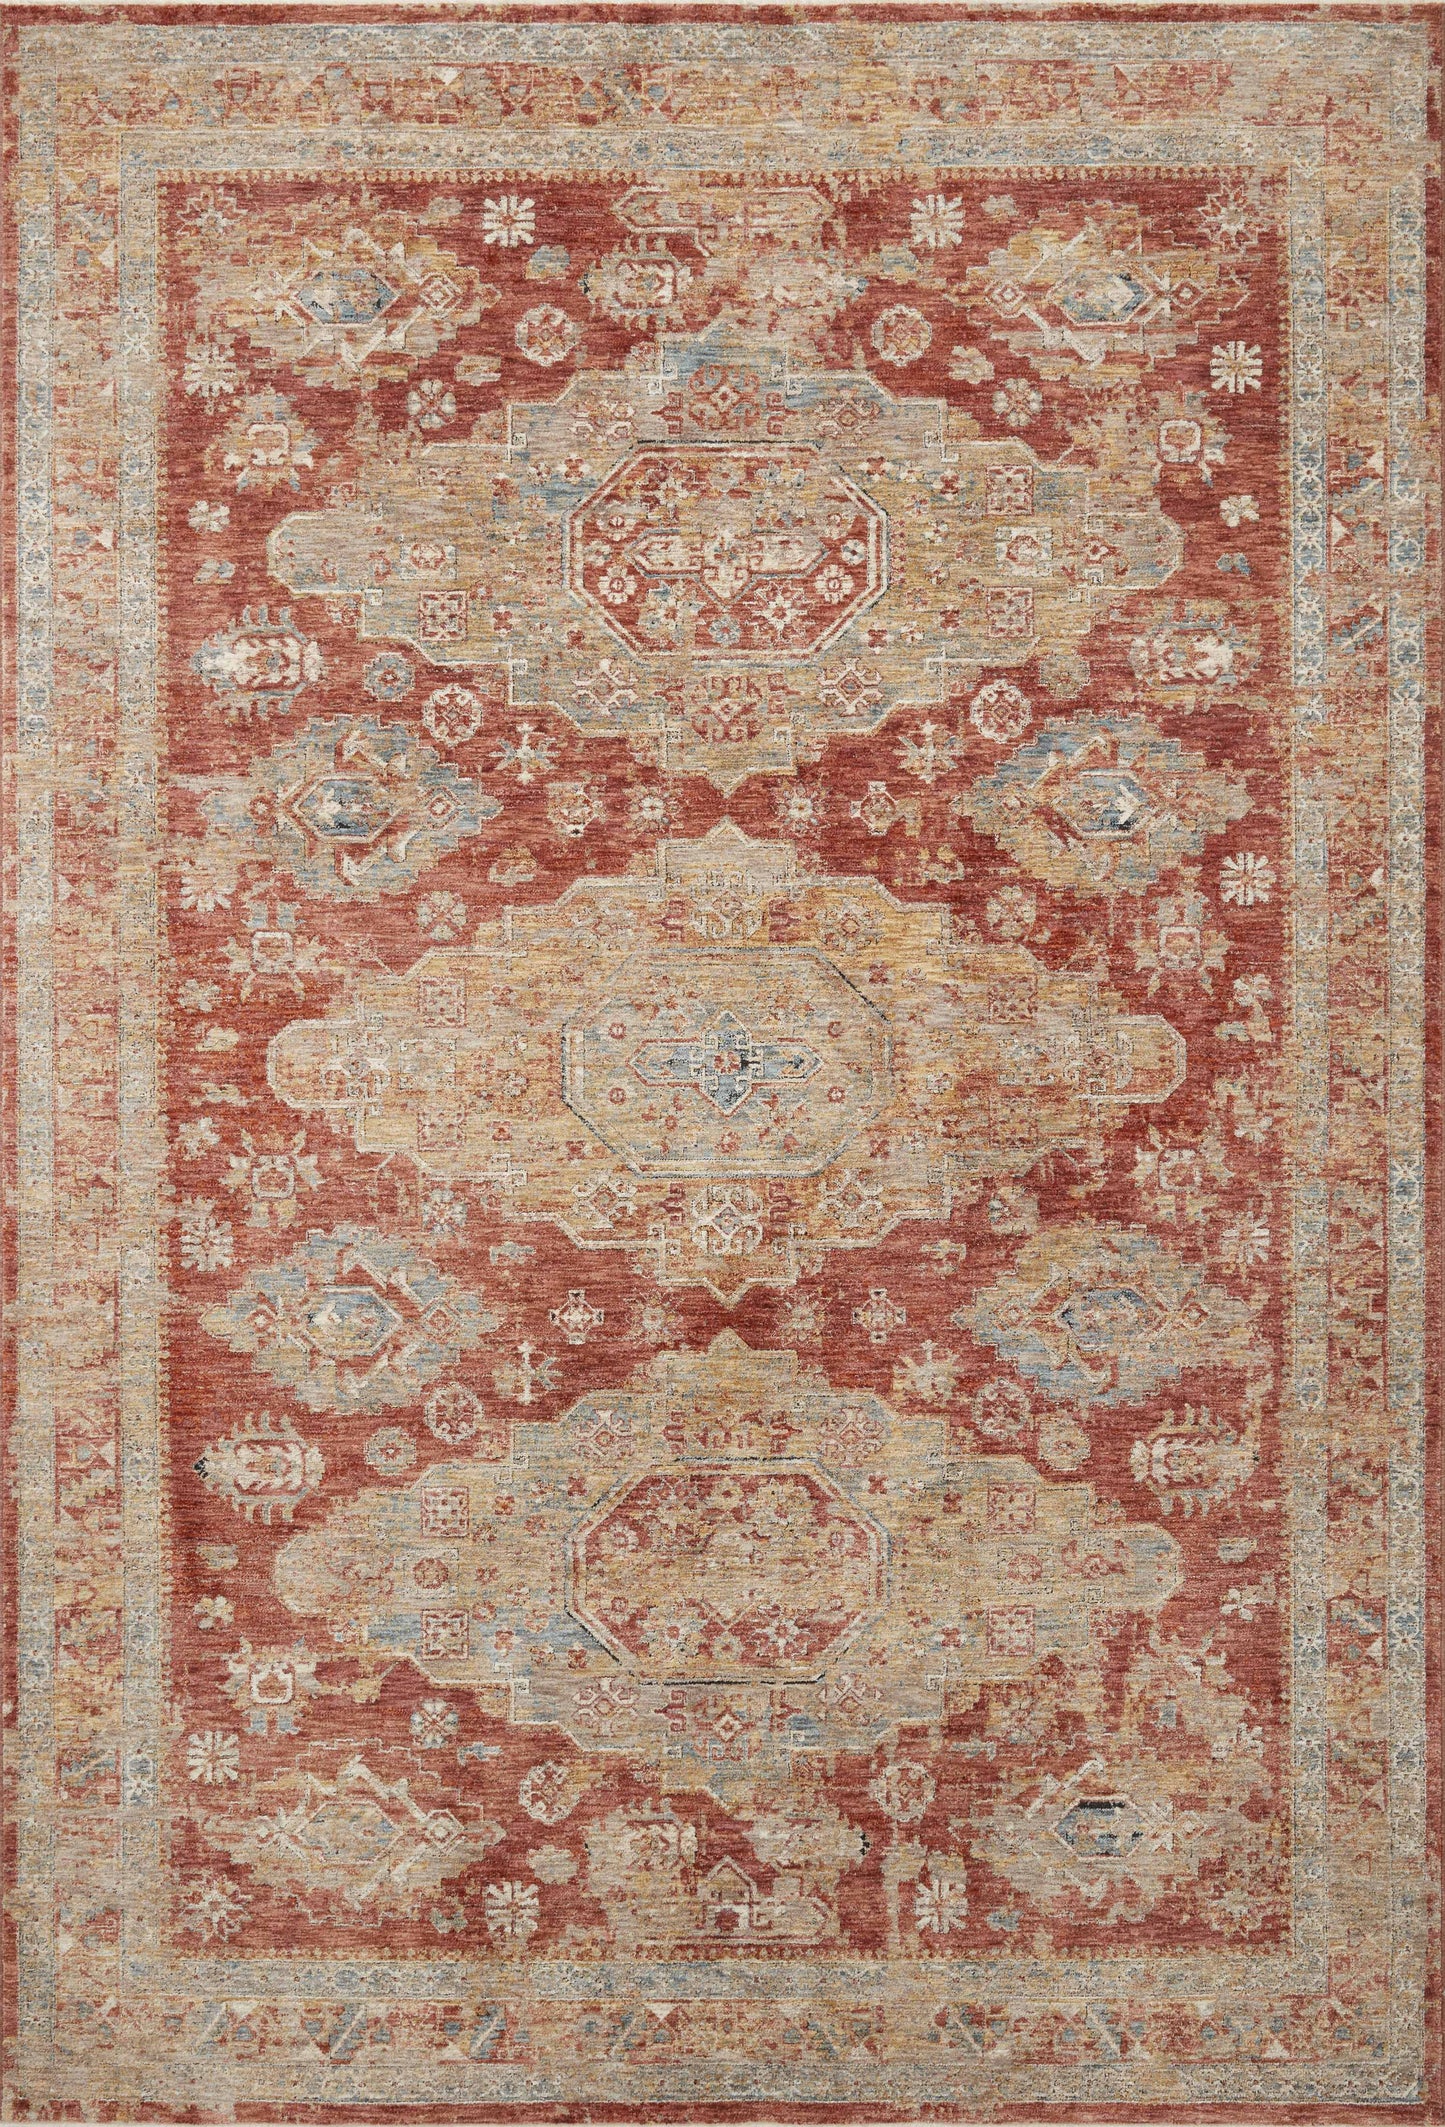 A picture of Loloi's Gaia rug, in style GAA-02, color Gold / Brick